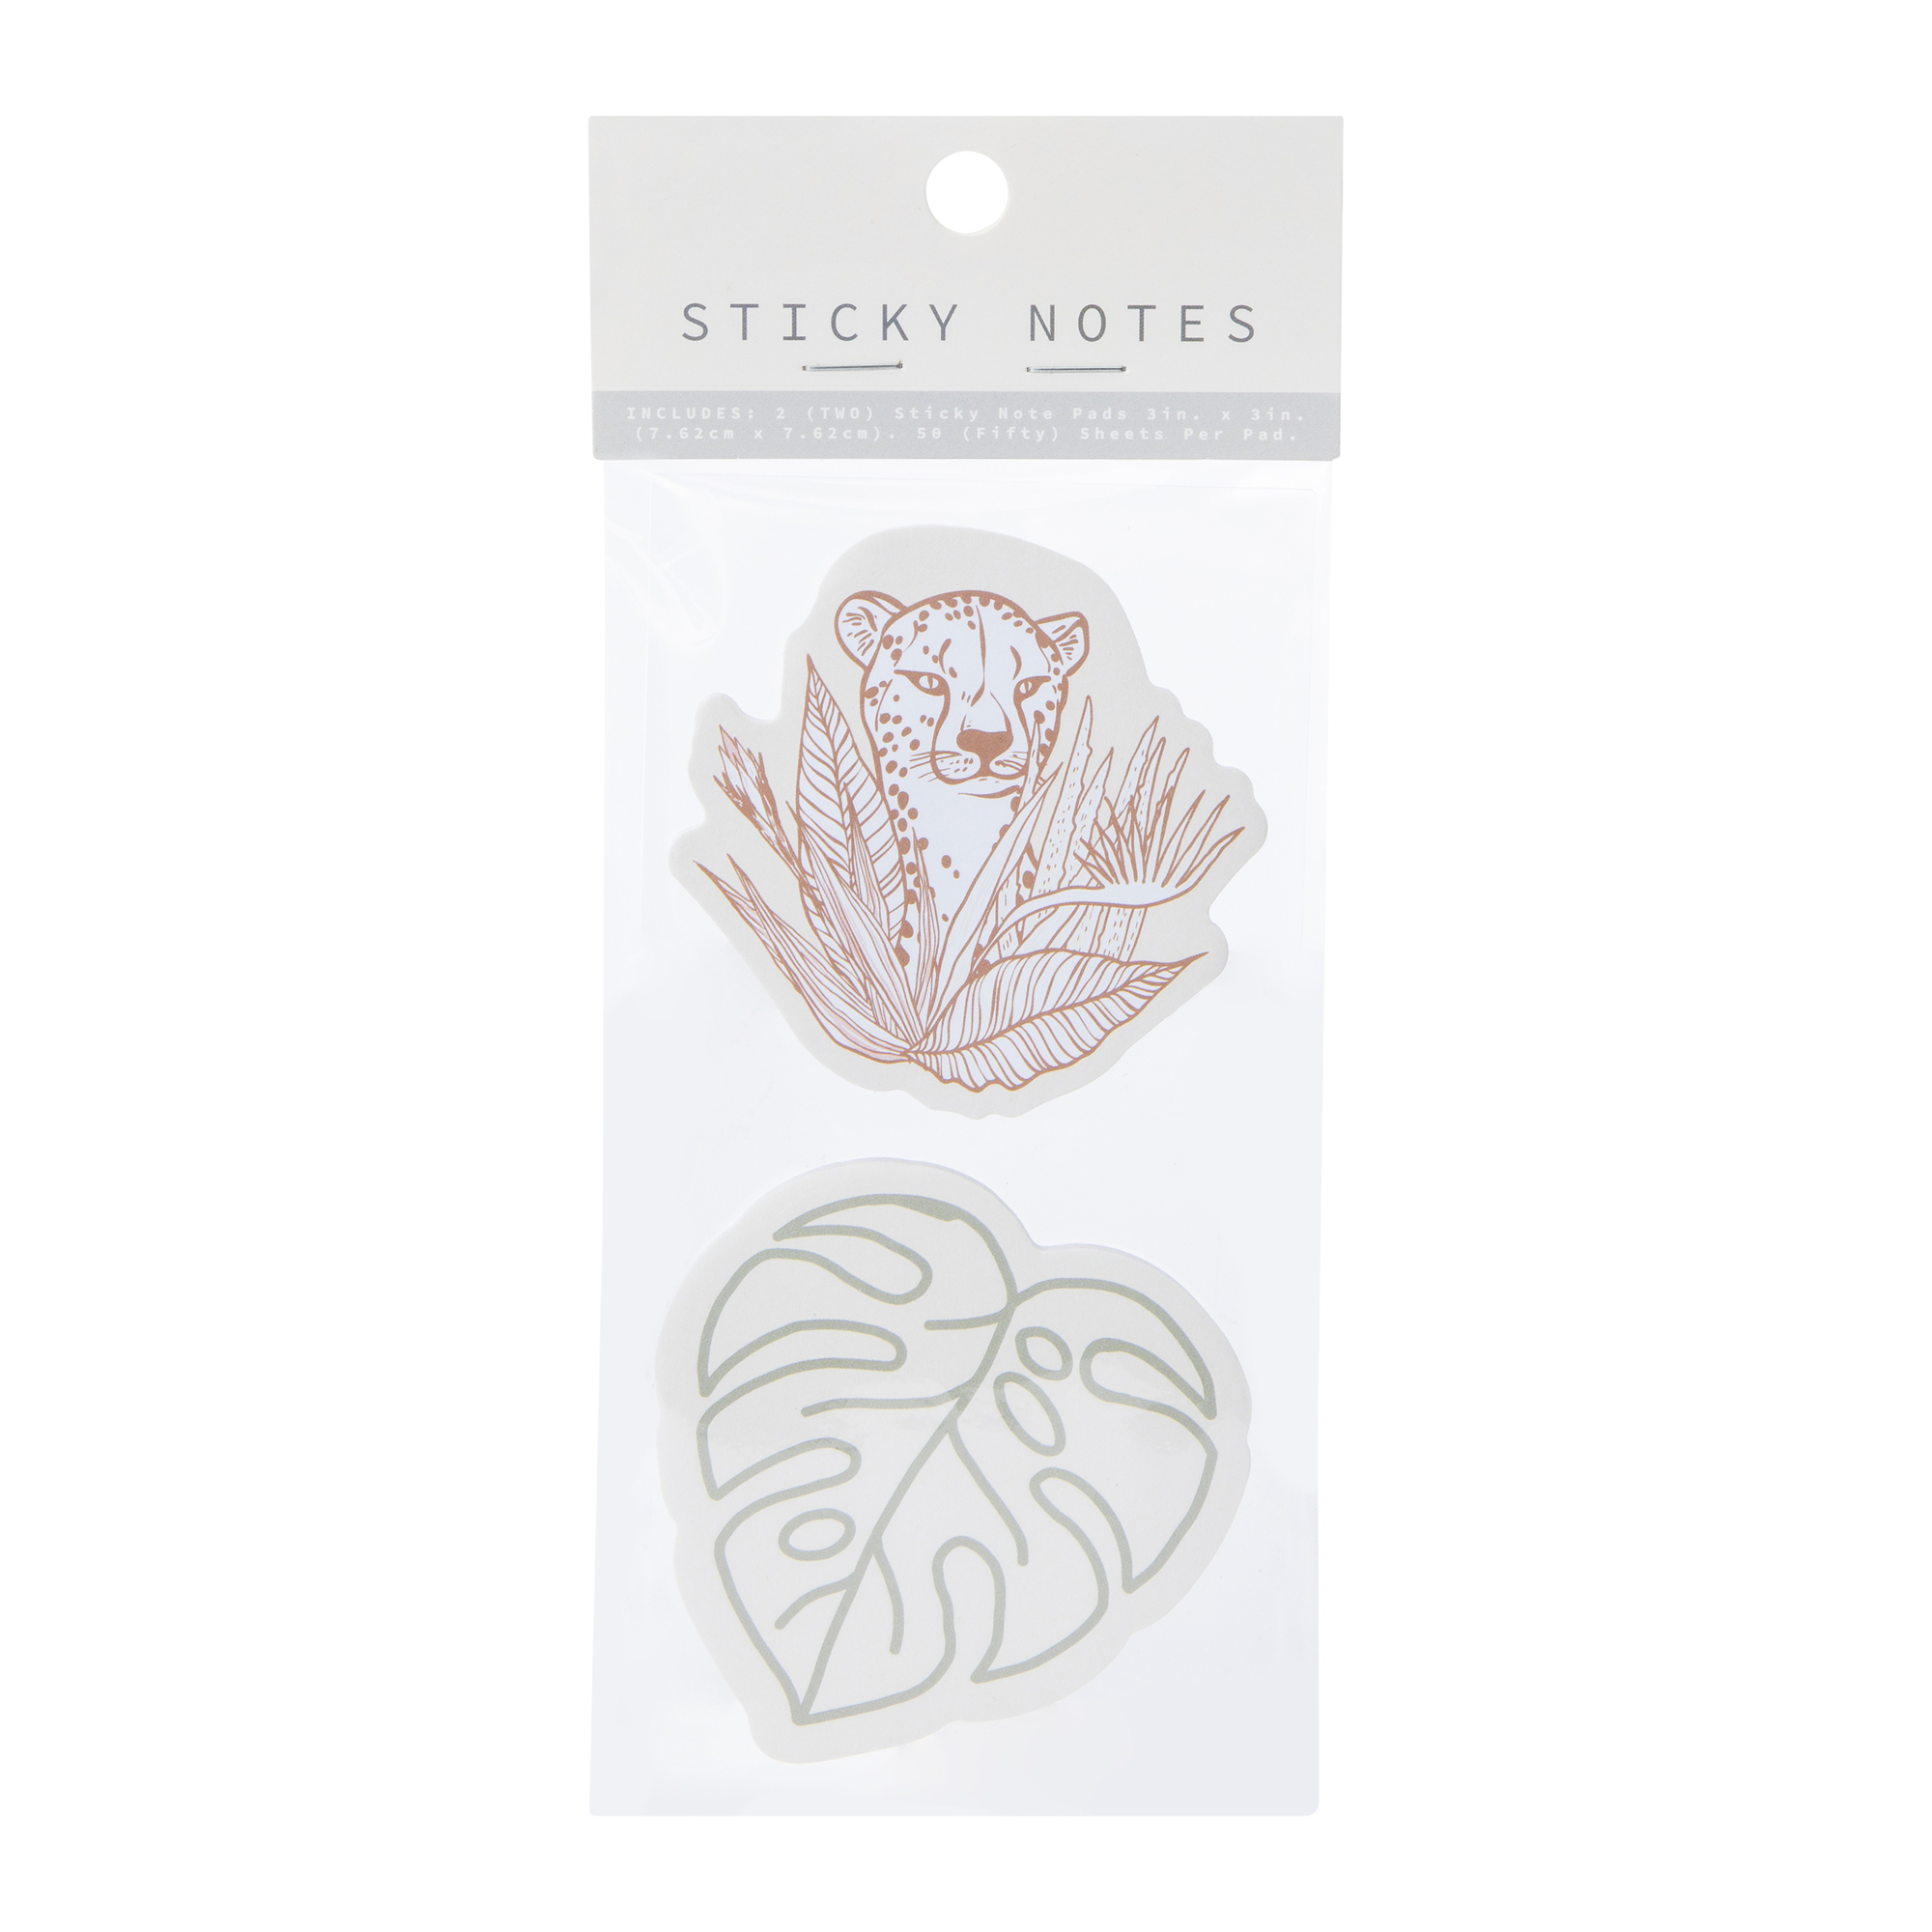 decorative sticky note pads 2-count